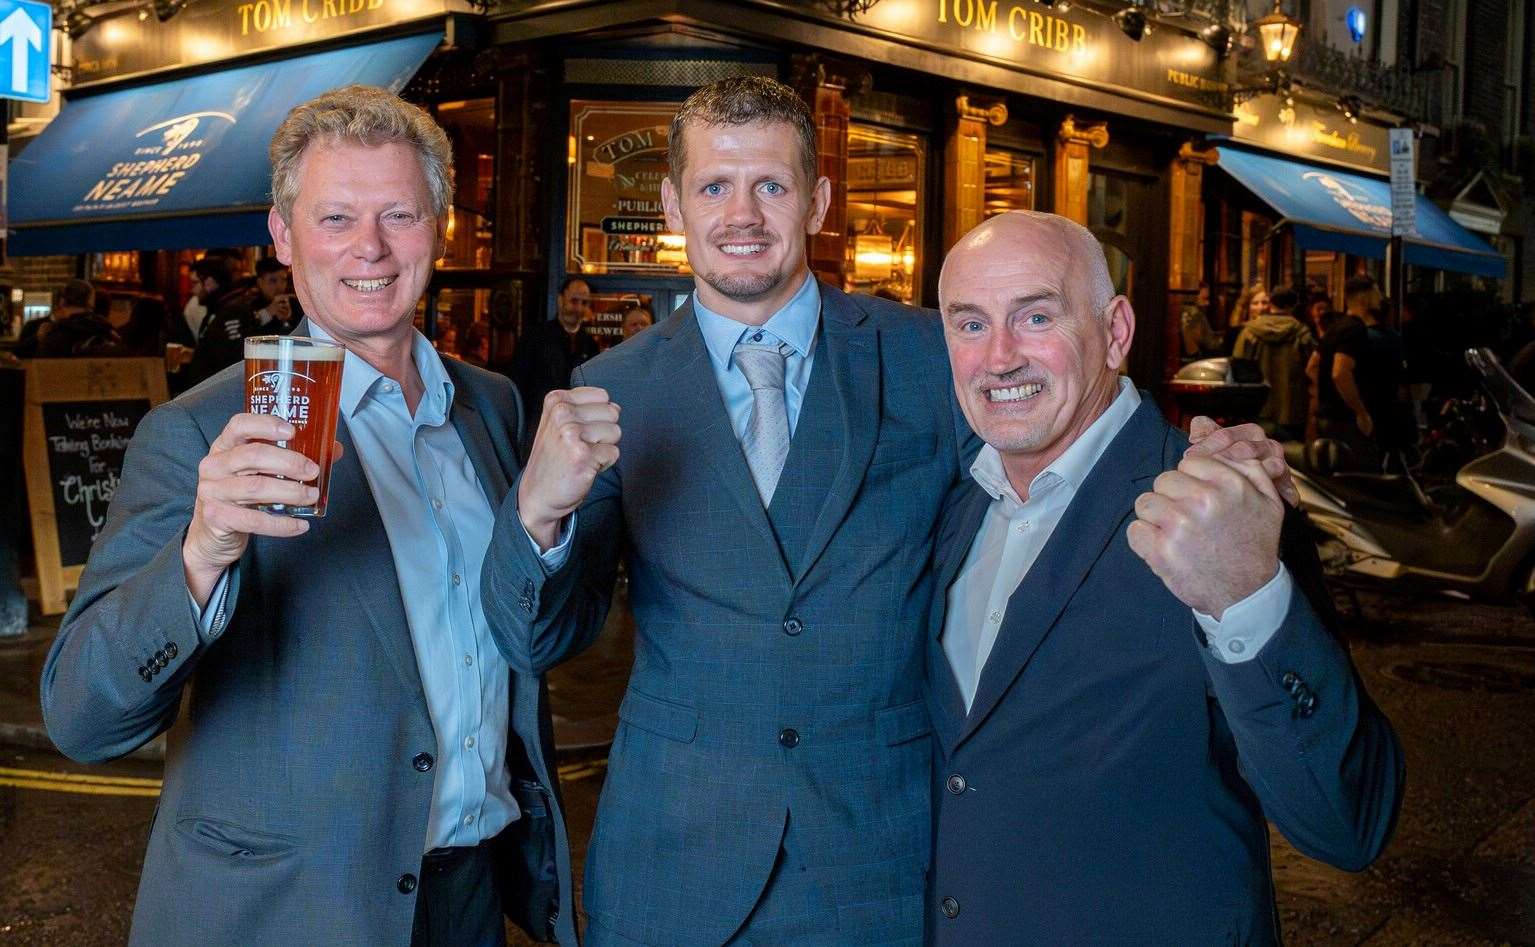 Shepherd Neame chief executive Jonathan Neame with Faversham boxer Alex Branson-Cole and former world champion Barry McGuigan outside the Tom Cribb pub. Picture: Shepherd Neame